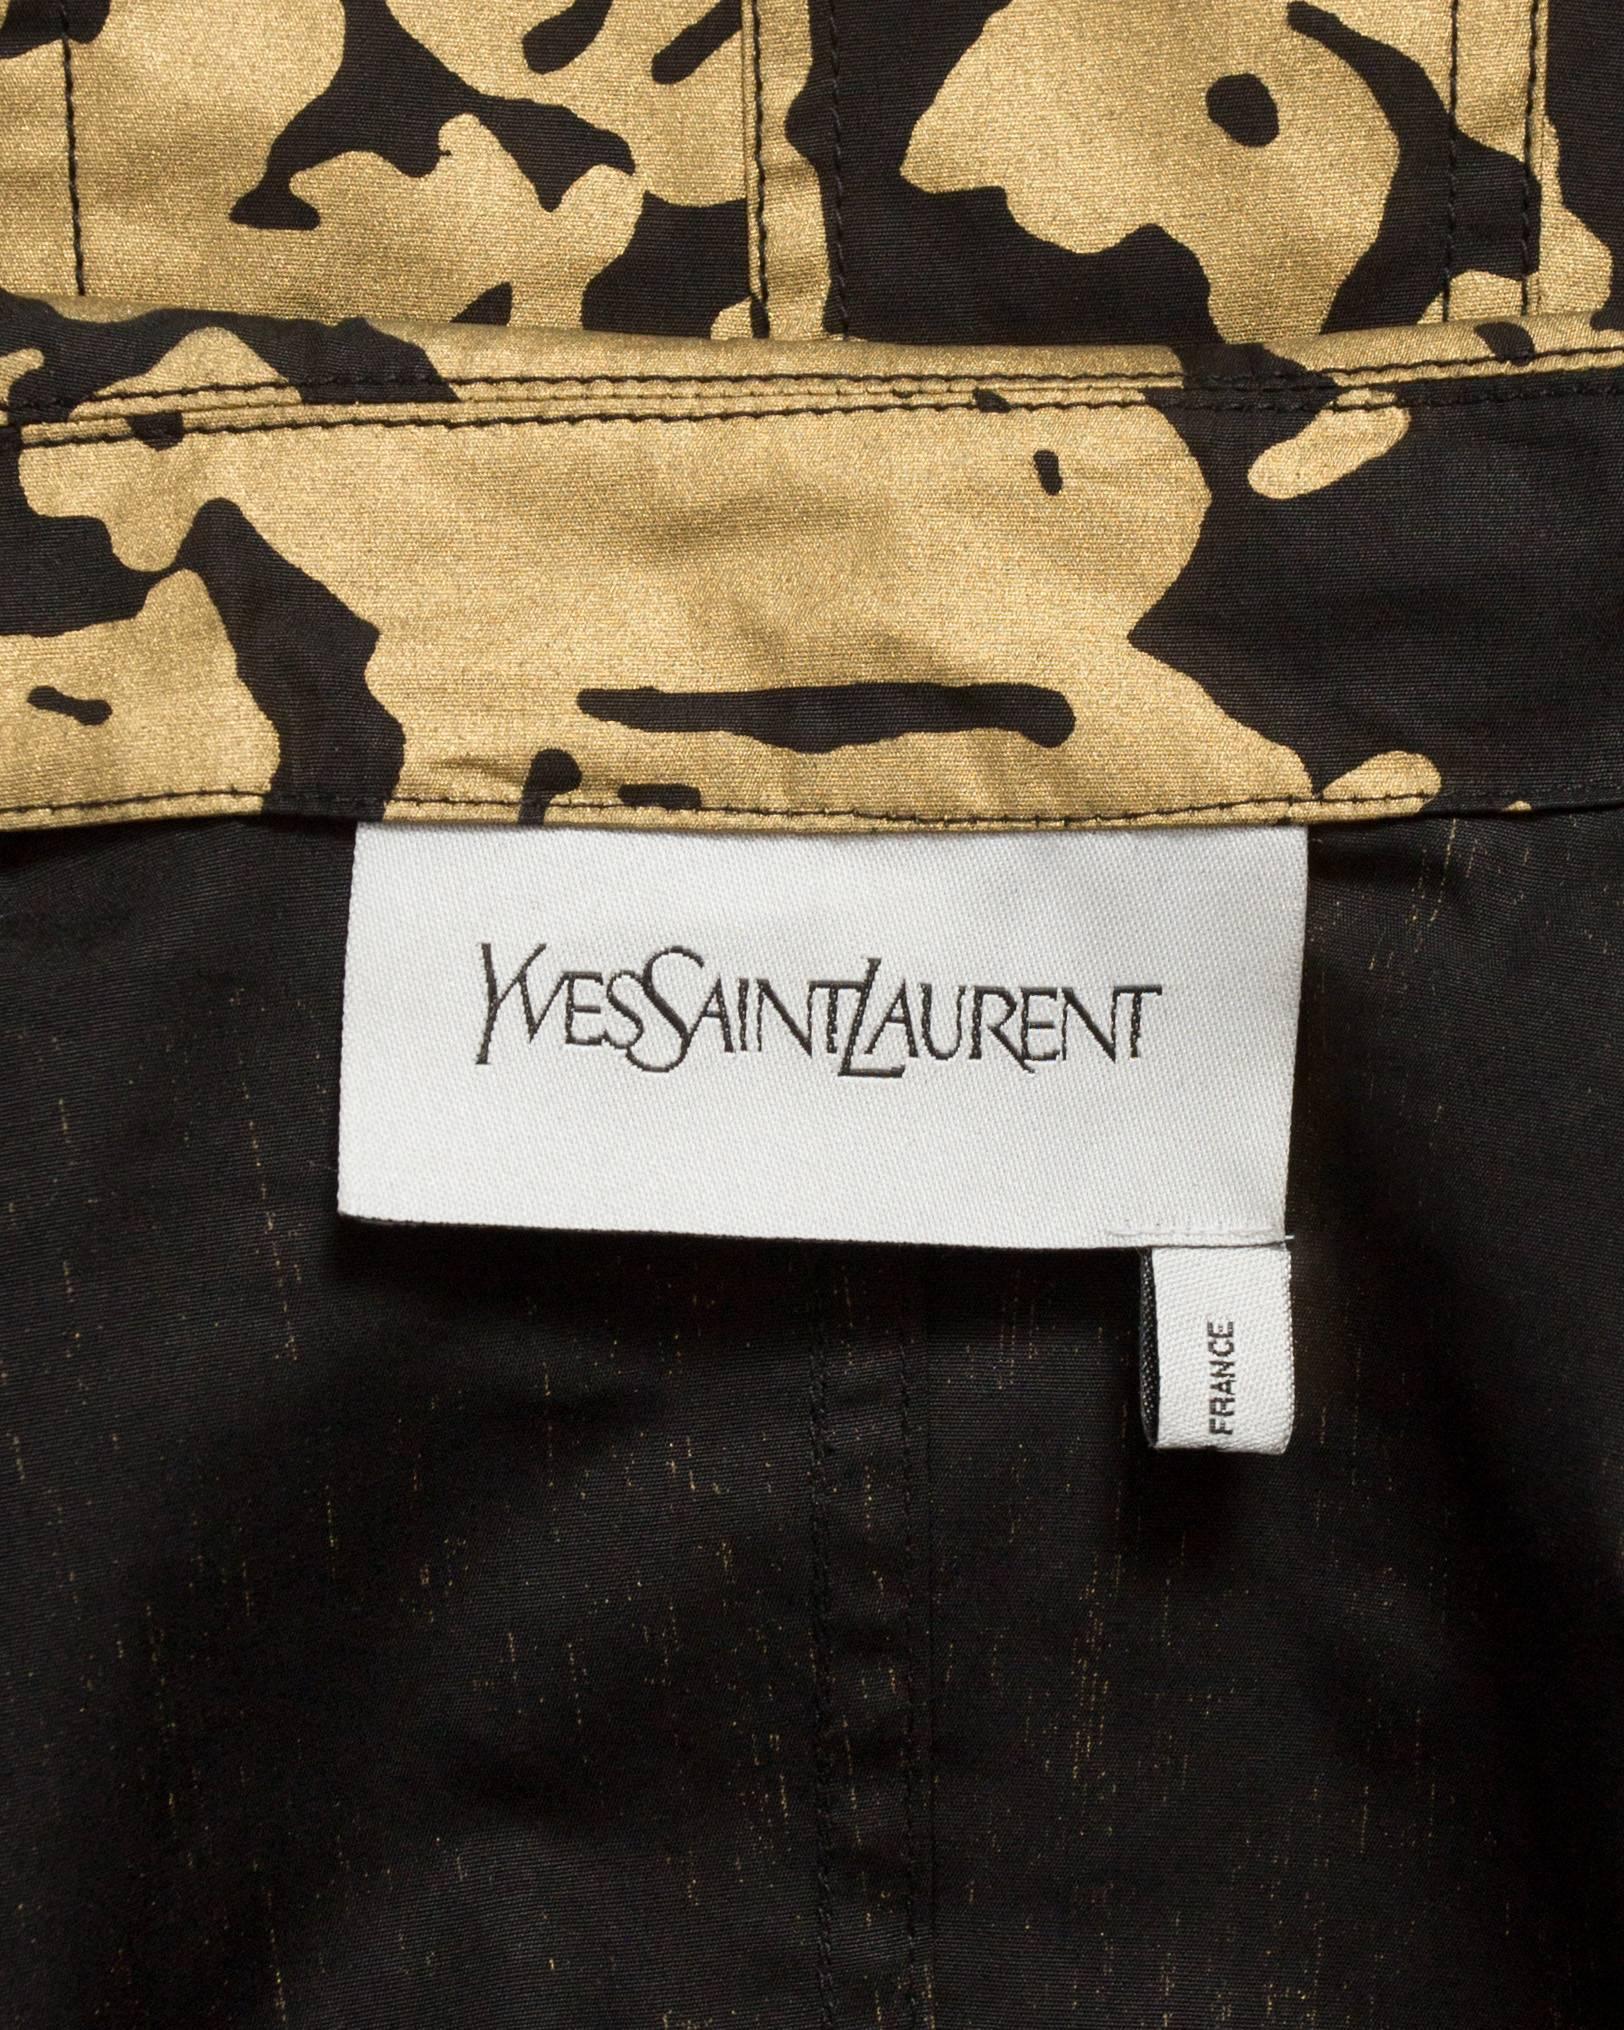 Yves Saint Laurent by Stefano Pilati black and gold evening jacket, circa 2008 1